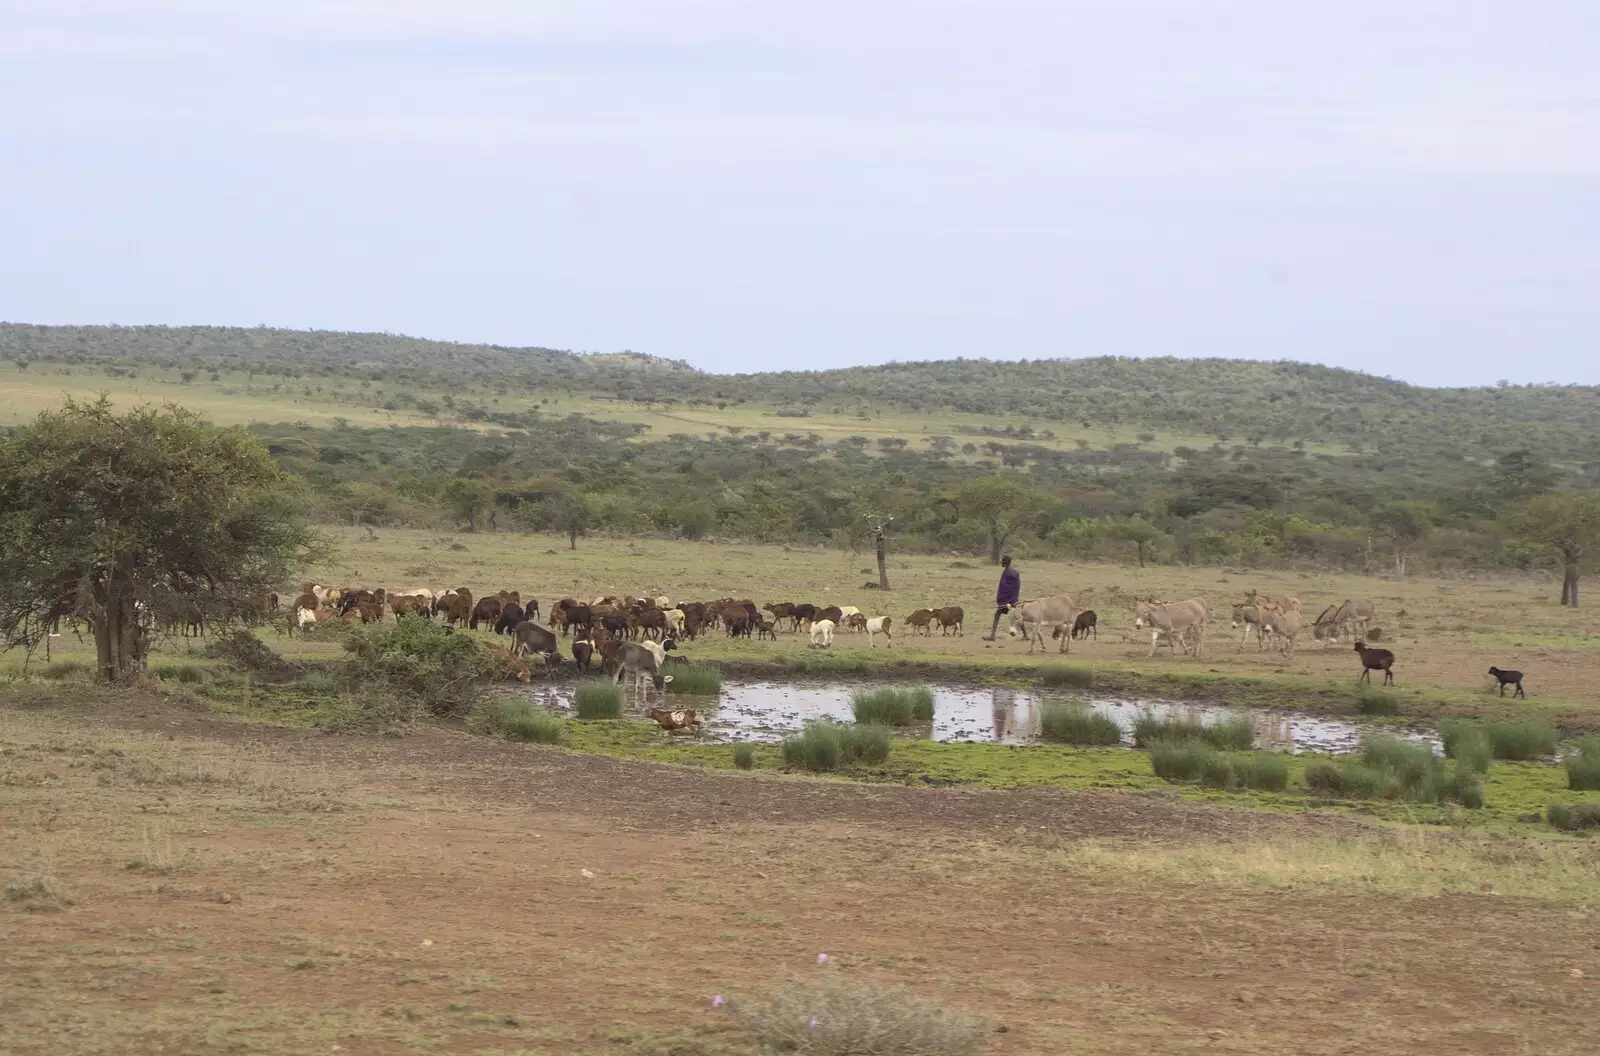 Sheep are herded past a pond, from Narok to Naivasha and Hell's Gate National Park, Kenya, Africa - 5th November 2010